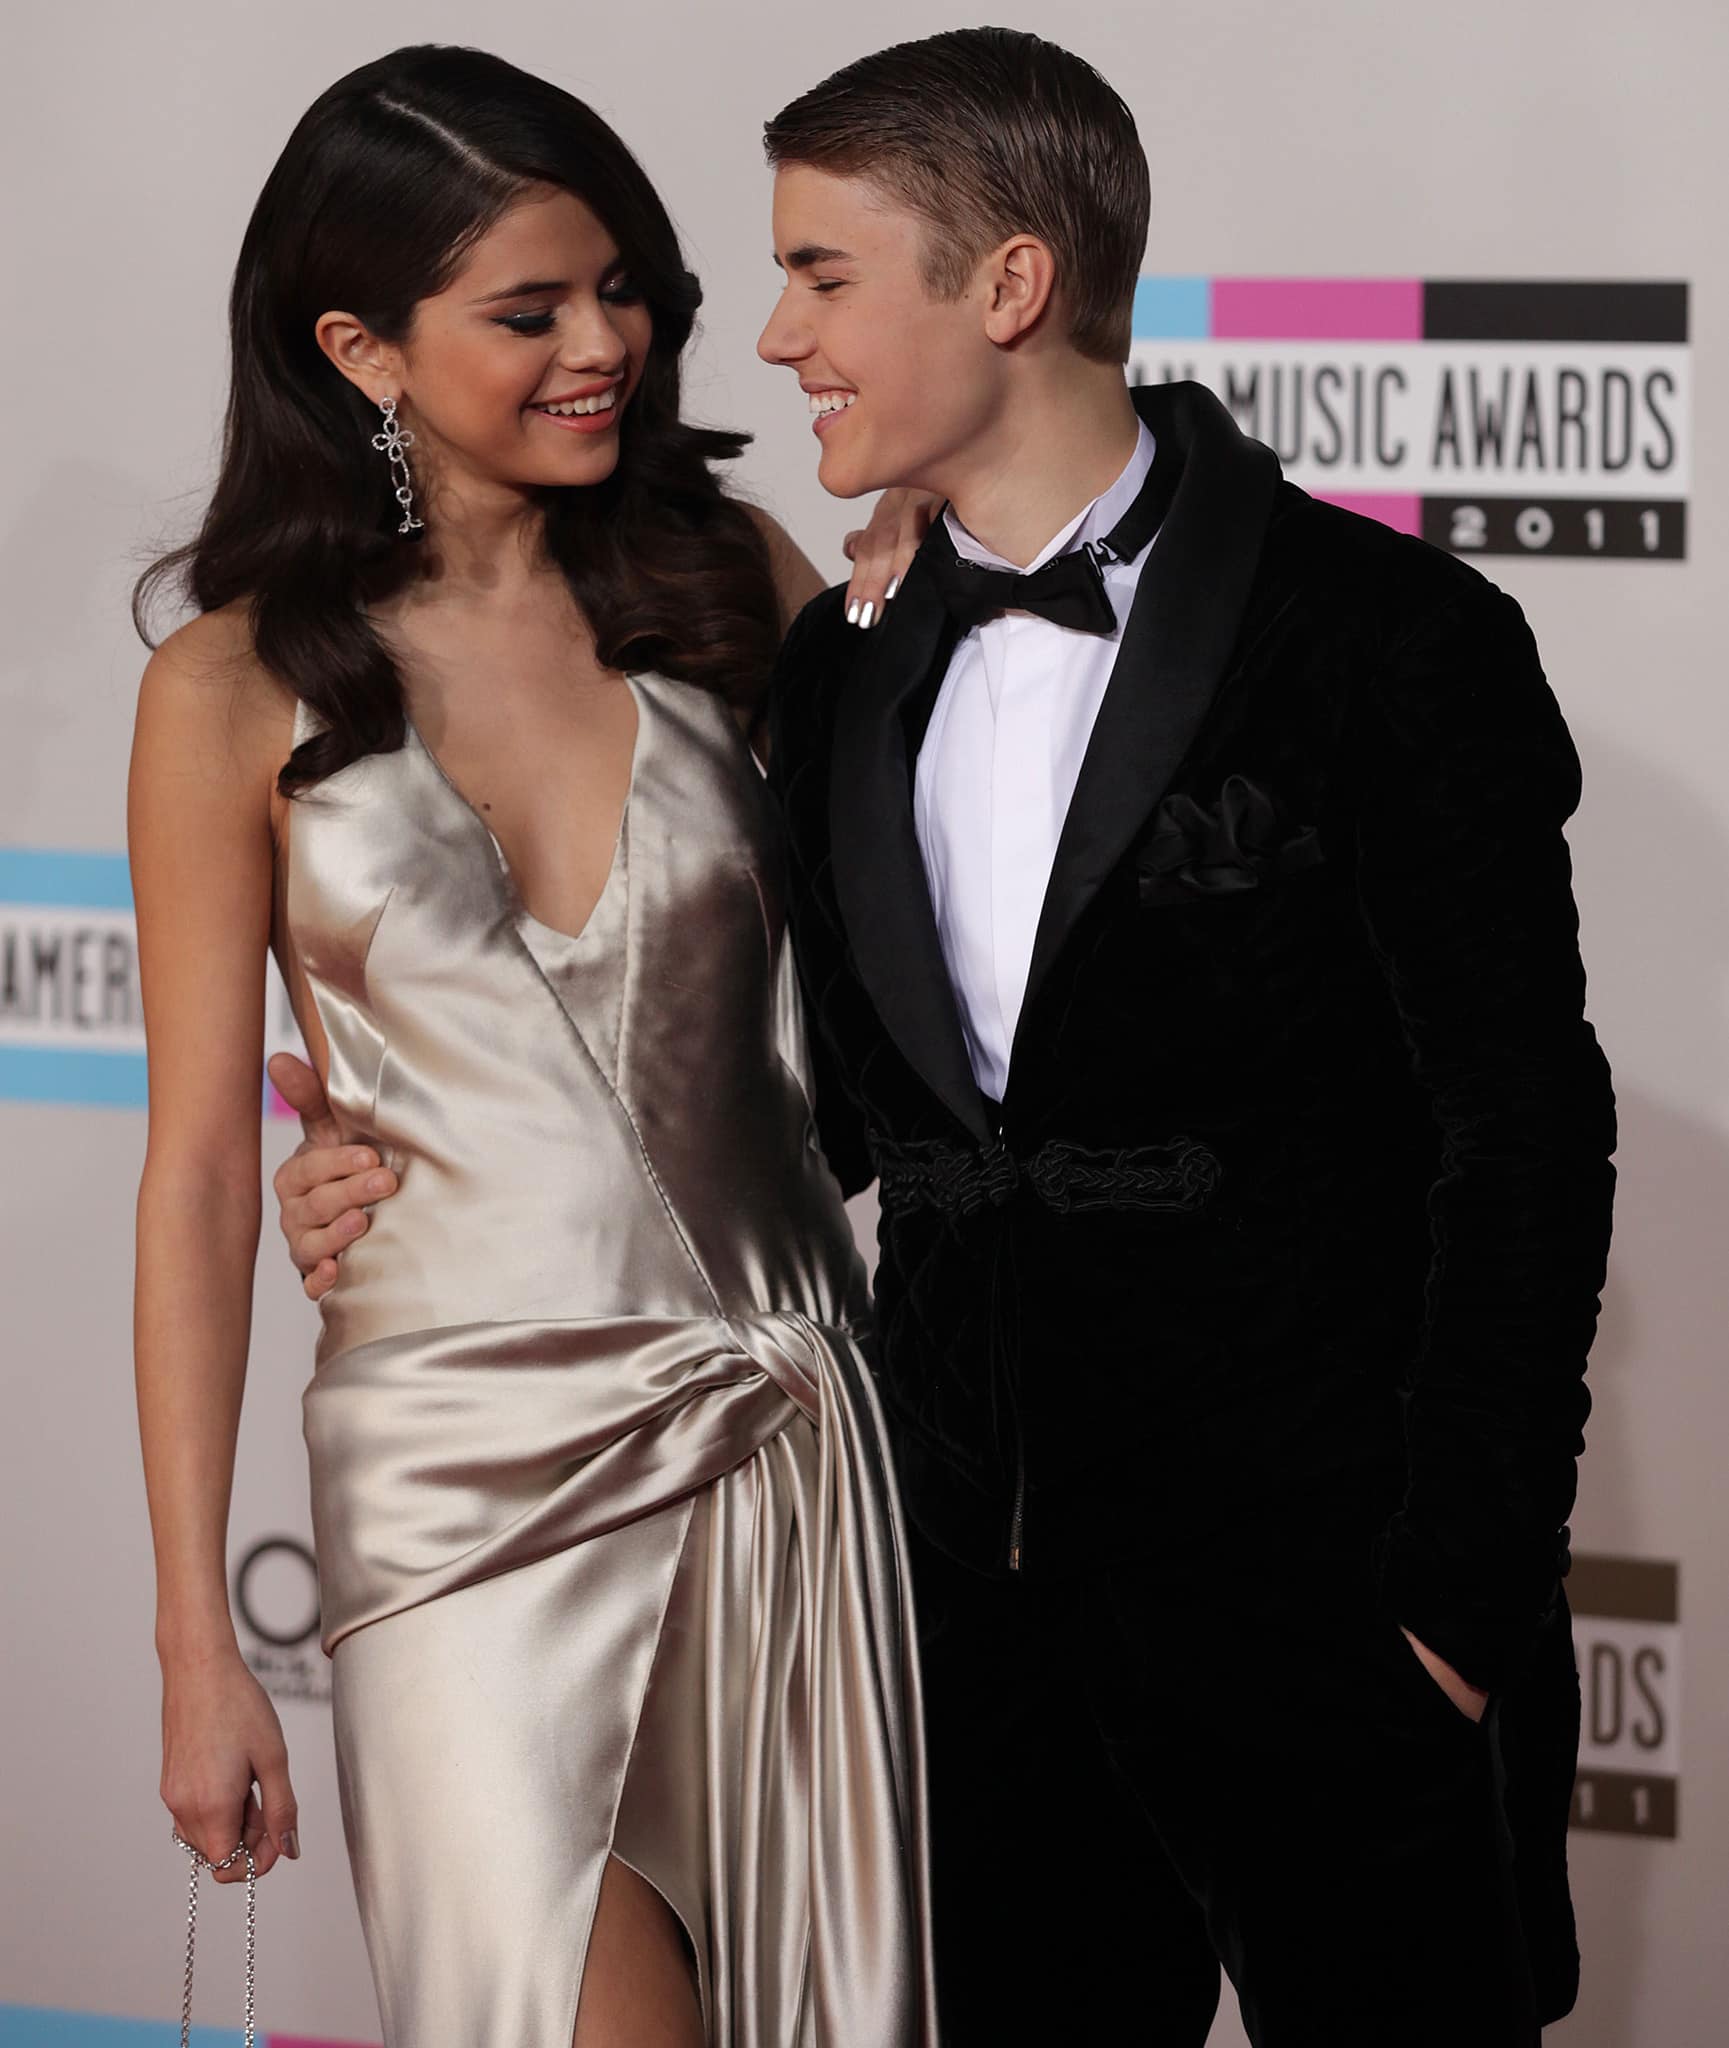 Selena Gomez shares how her tough break up with Justin Bieber shaped her